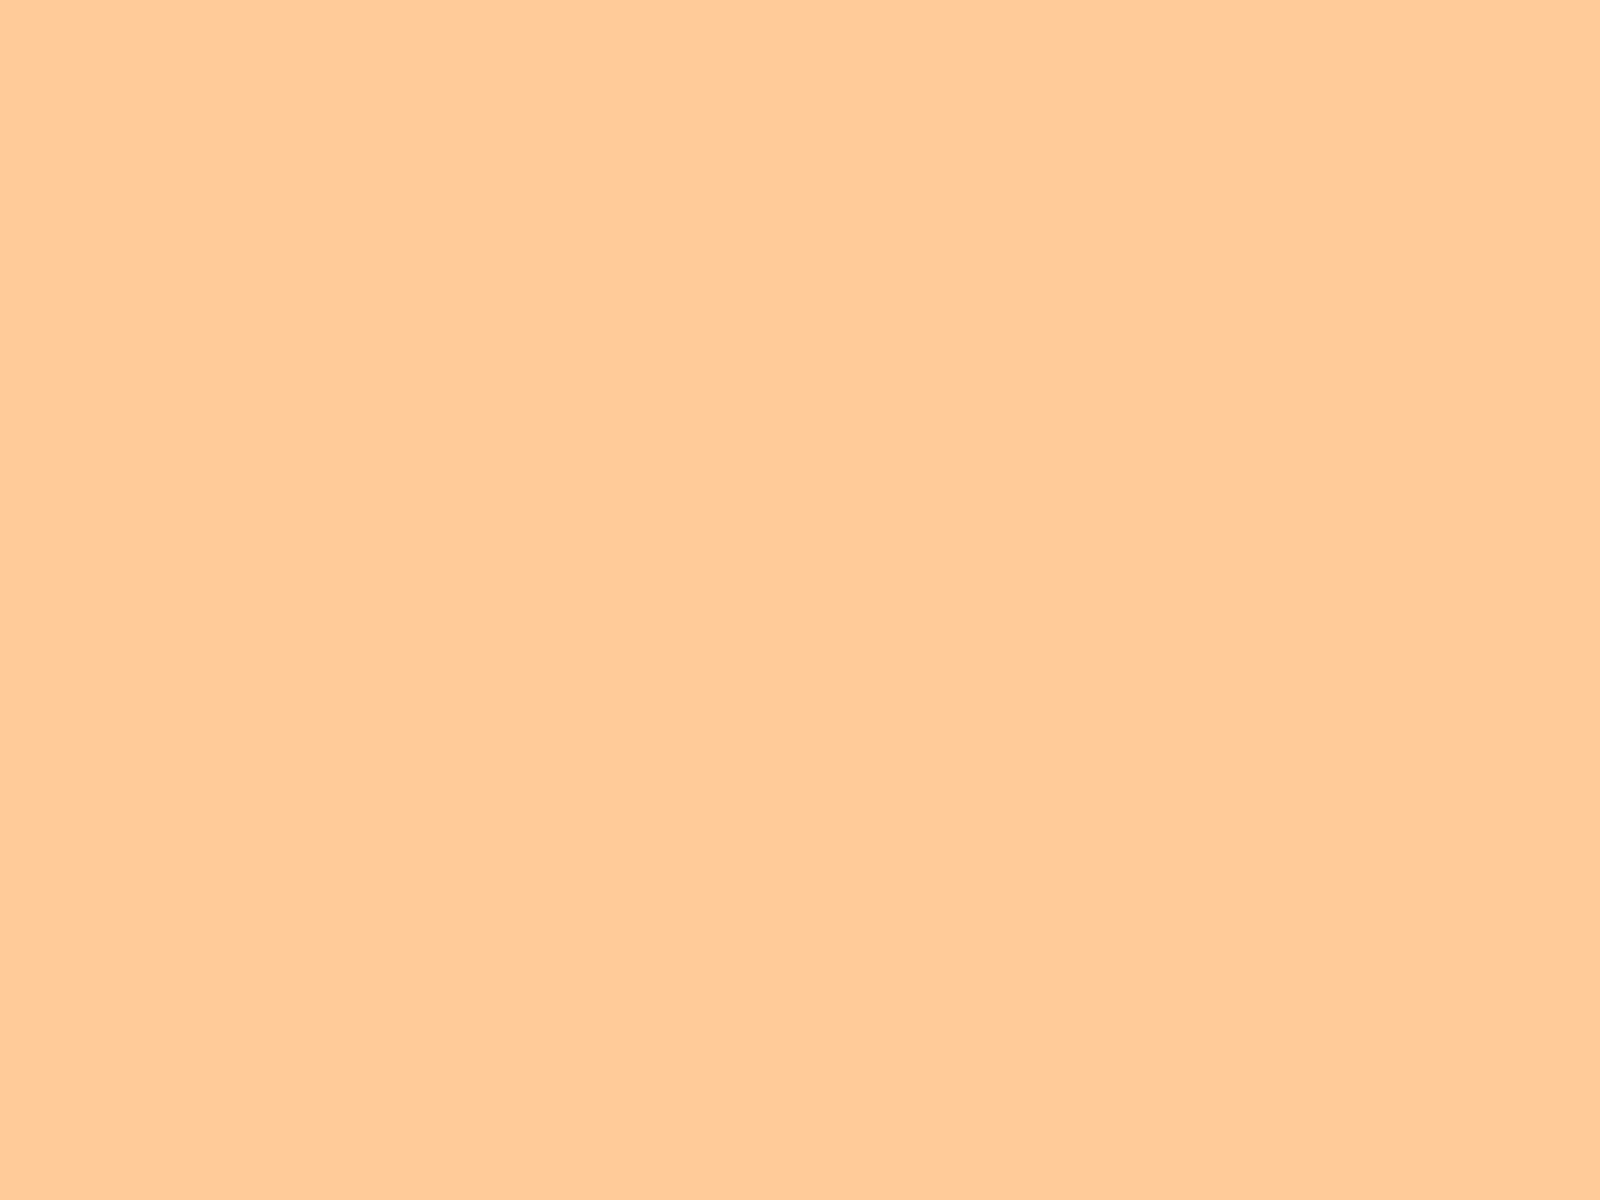 Free 1600x1200 resolution Peach orange solid color background view